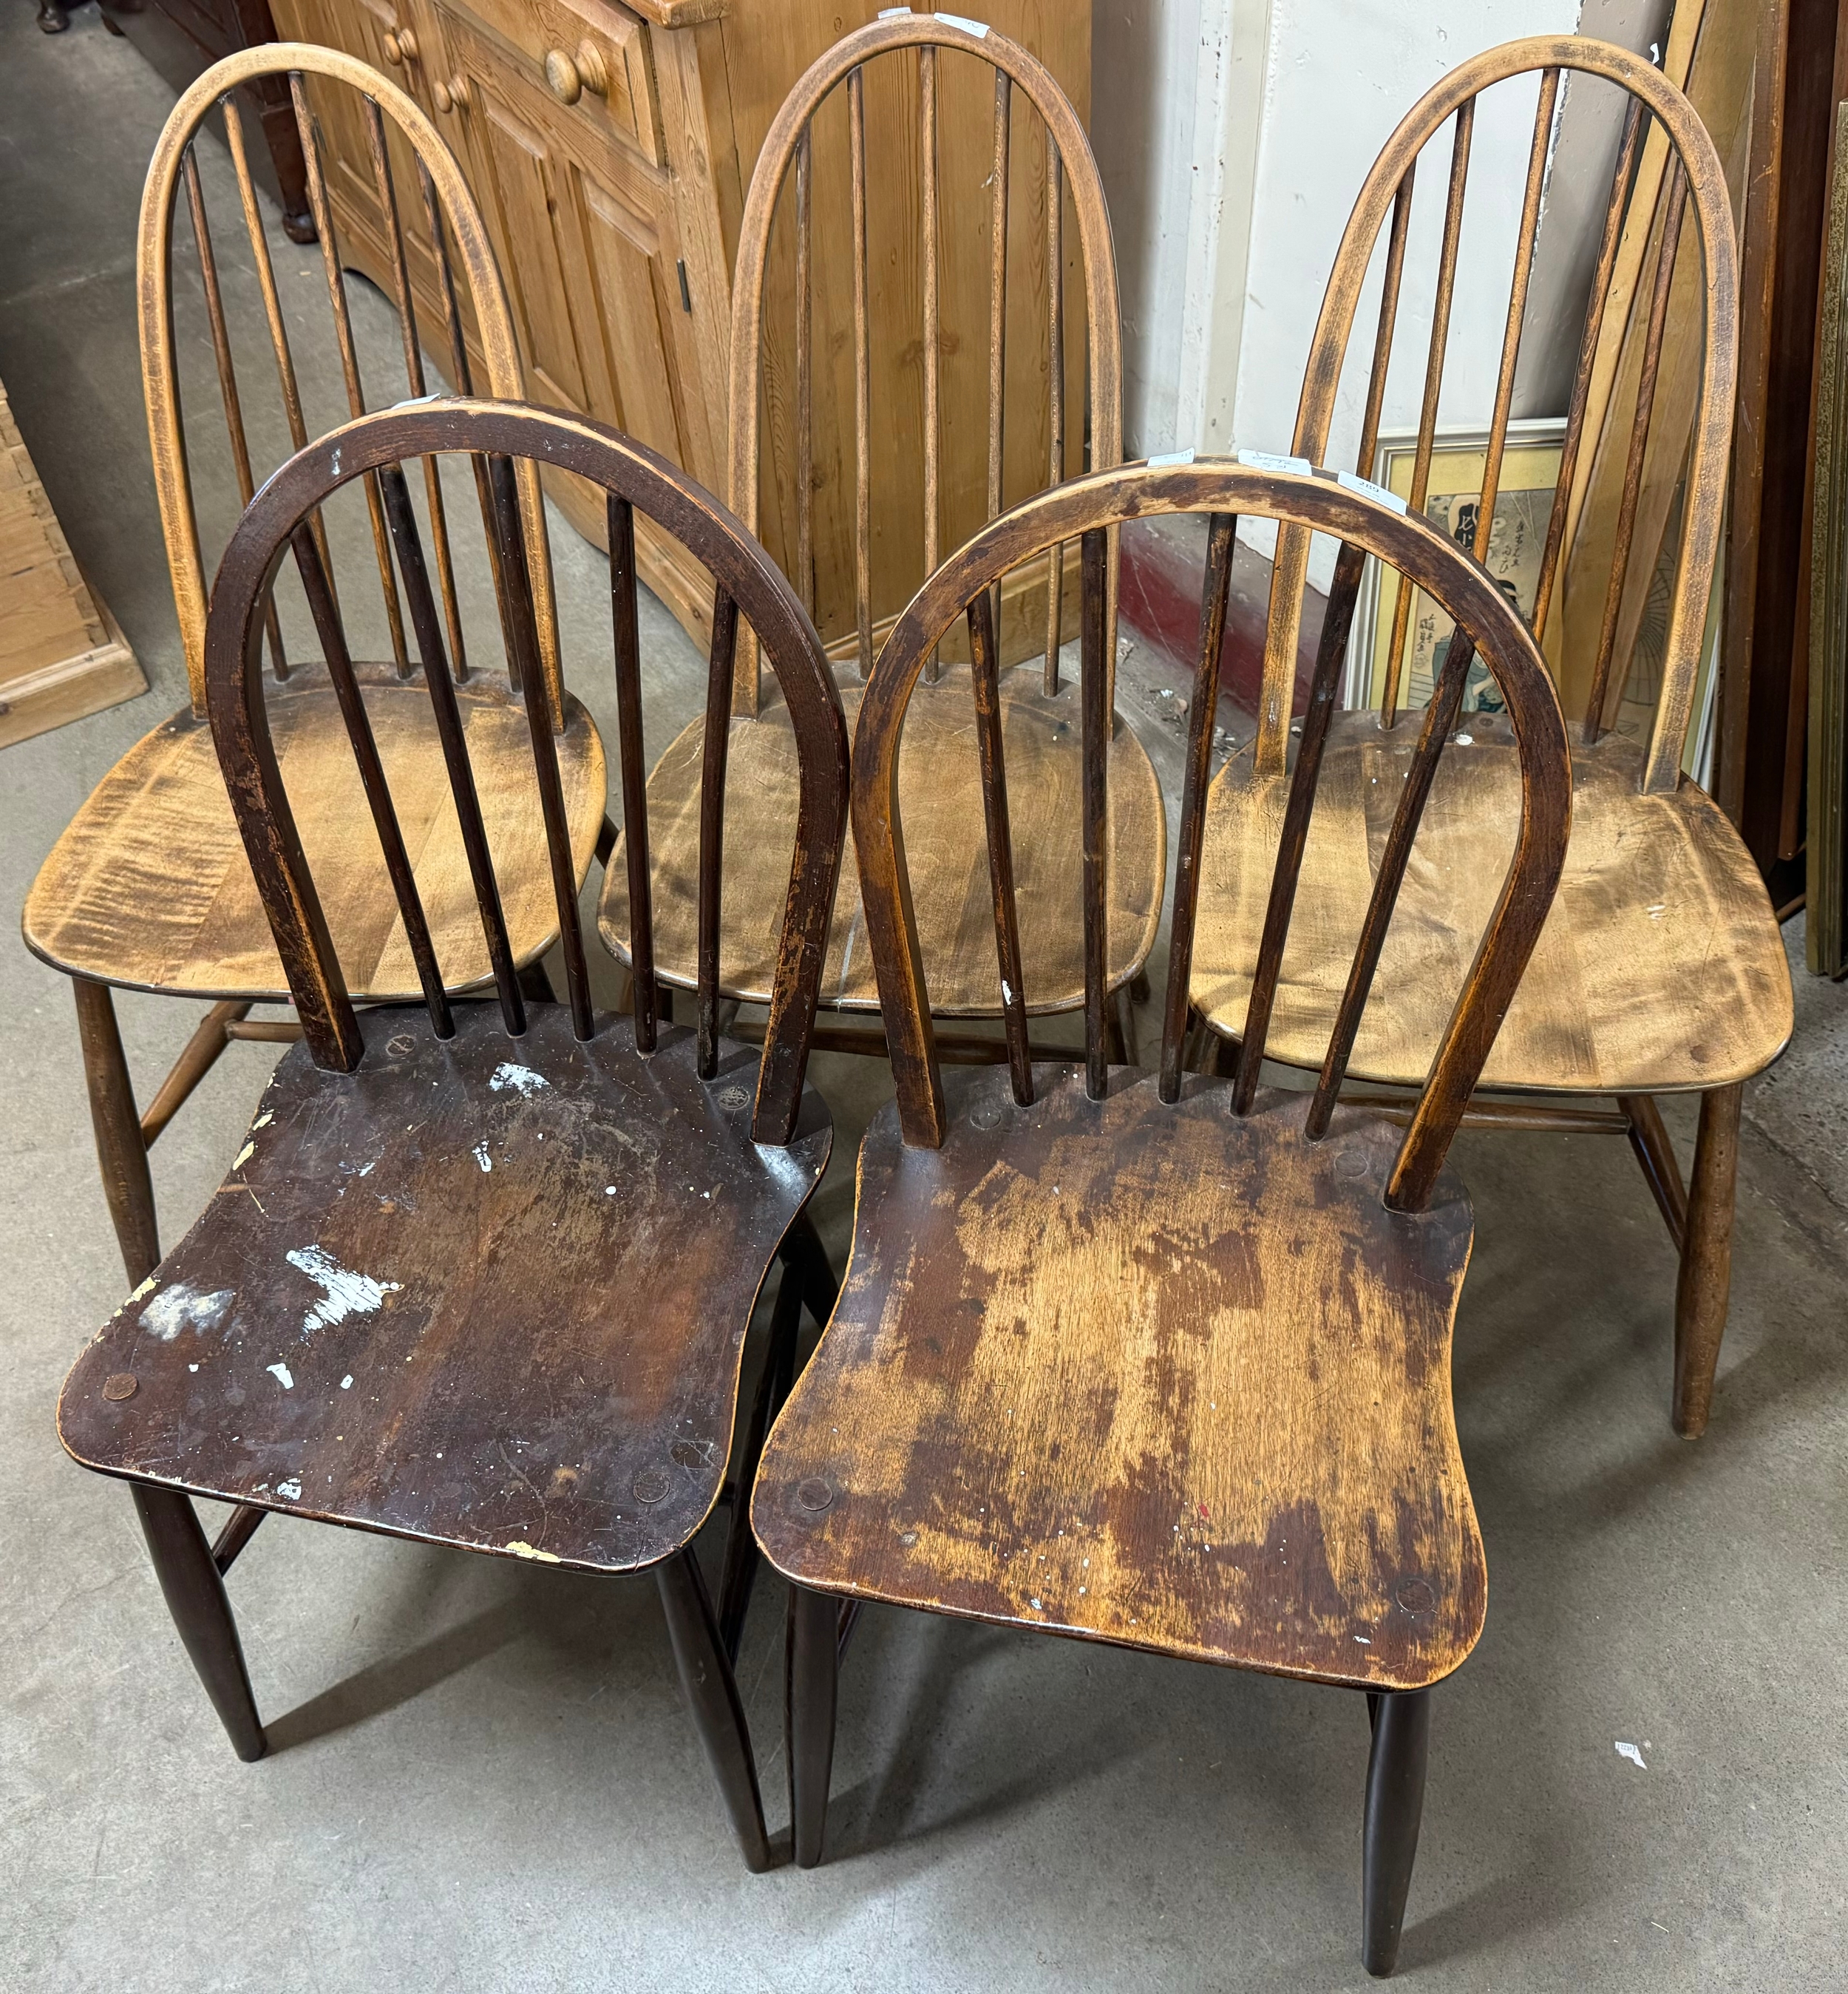 A pair of Ercol elm and beech Windsor chairs and three Quaker chairs